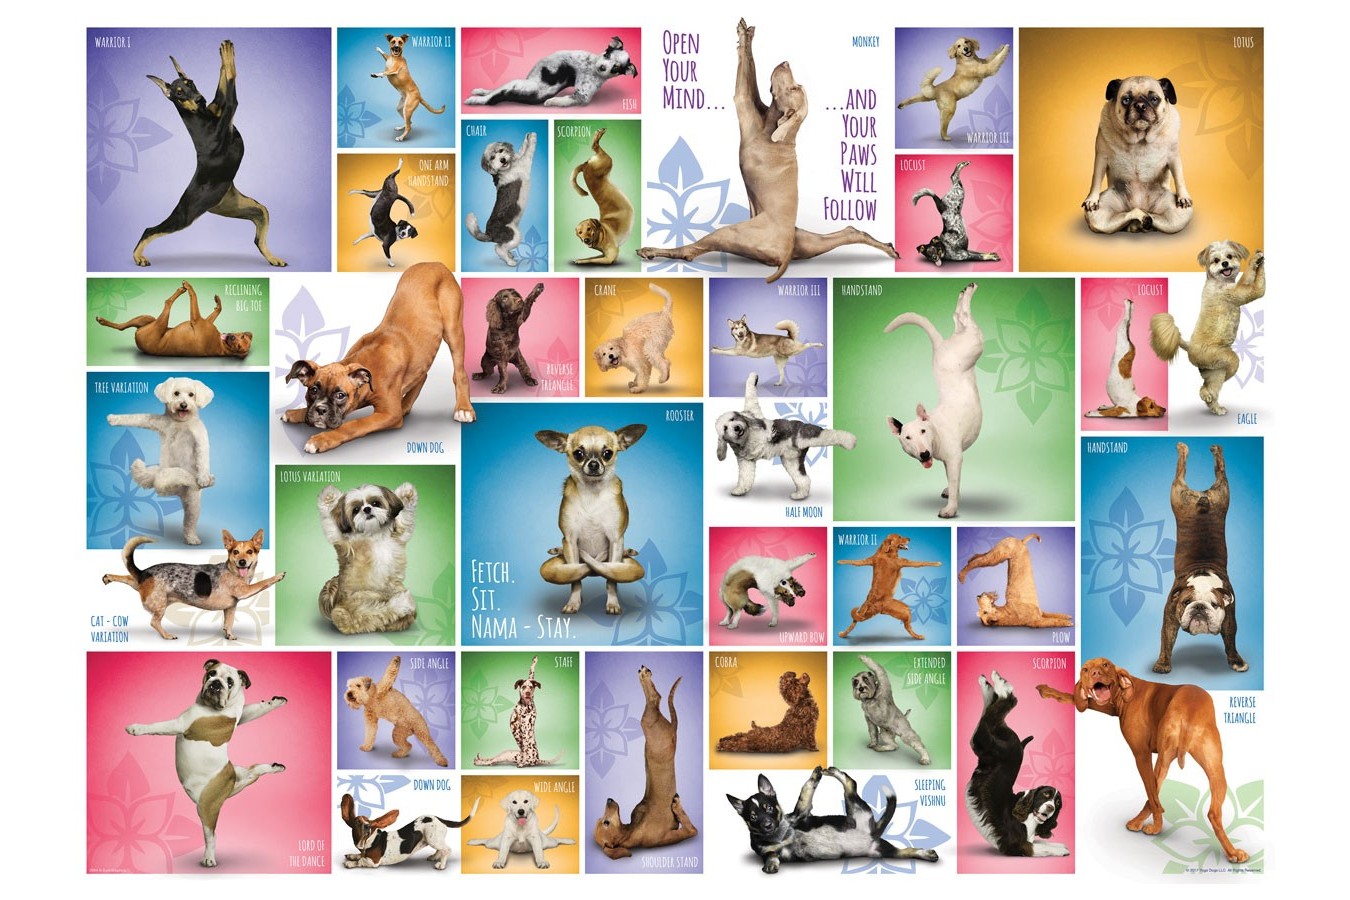 Puzzle Eurographics - Yoga Dogs, 1000 piese (6000-0954)